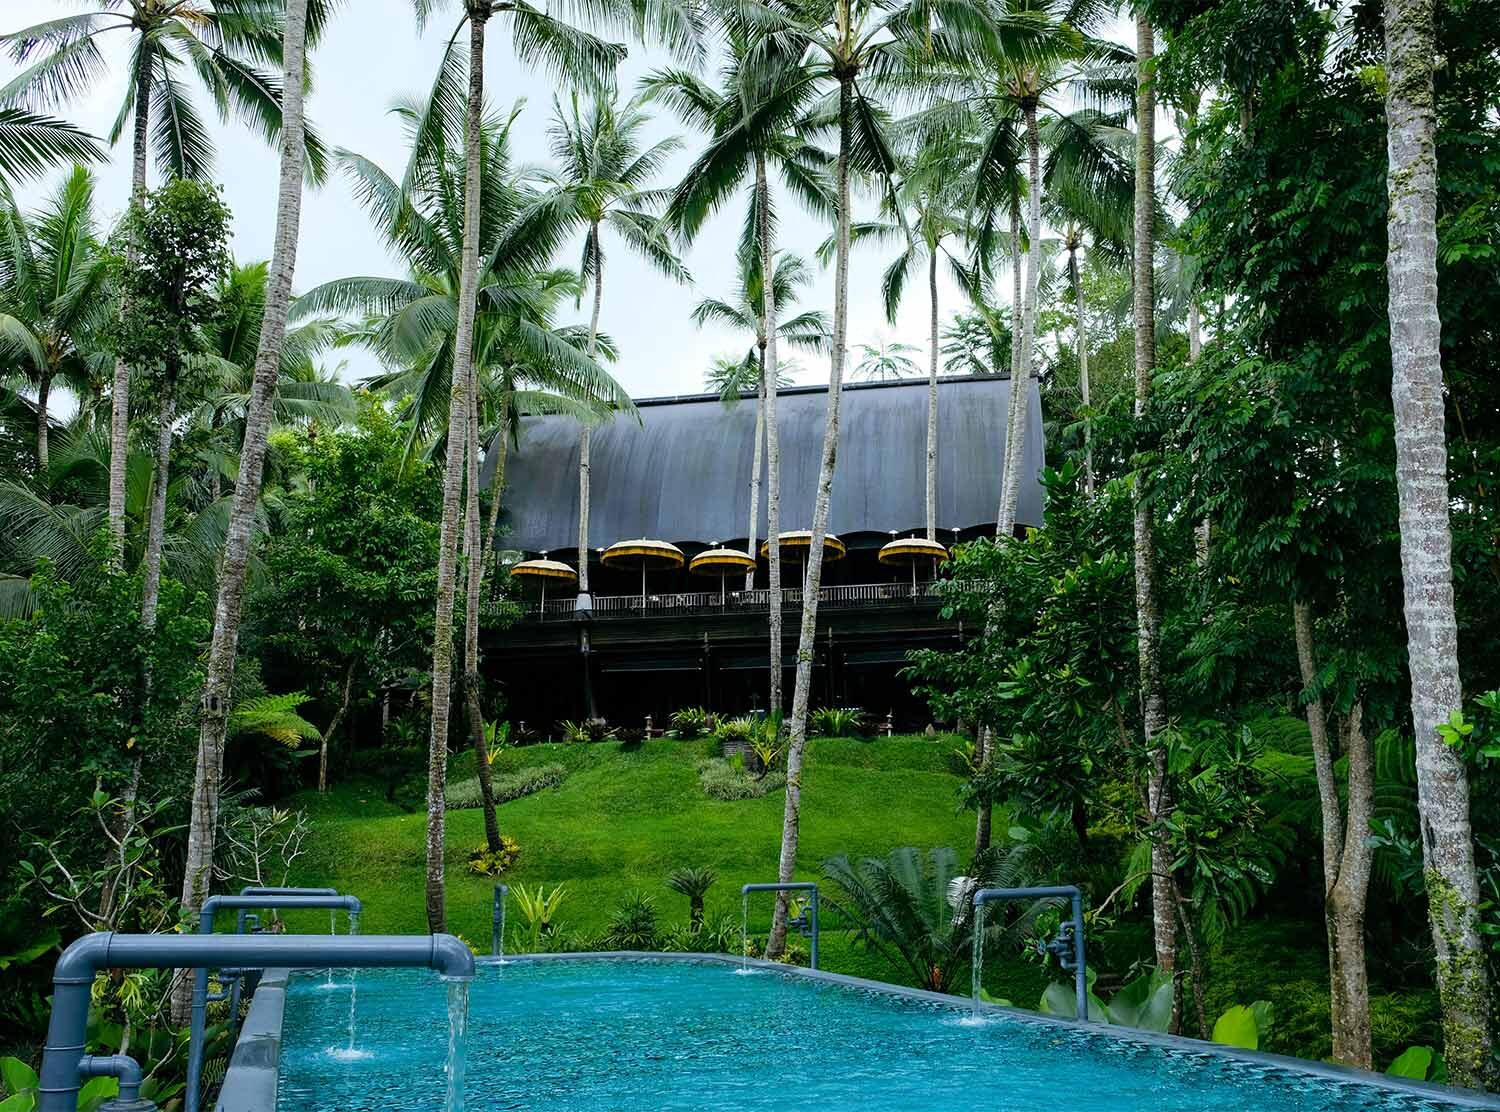 Capella Ubud The hotel was built to adapt to the landscape, and most of the staff grew up playing in this jungle. That pulls on my heartstrings